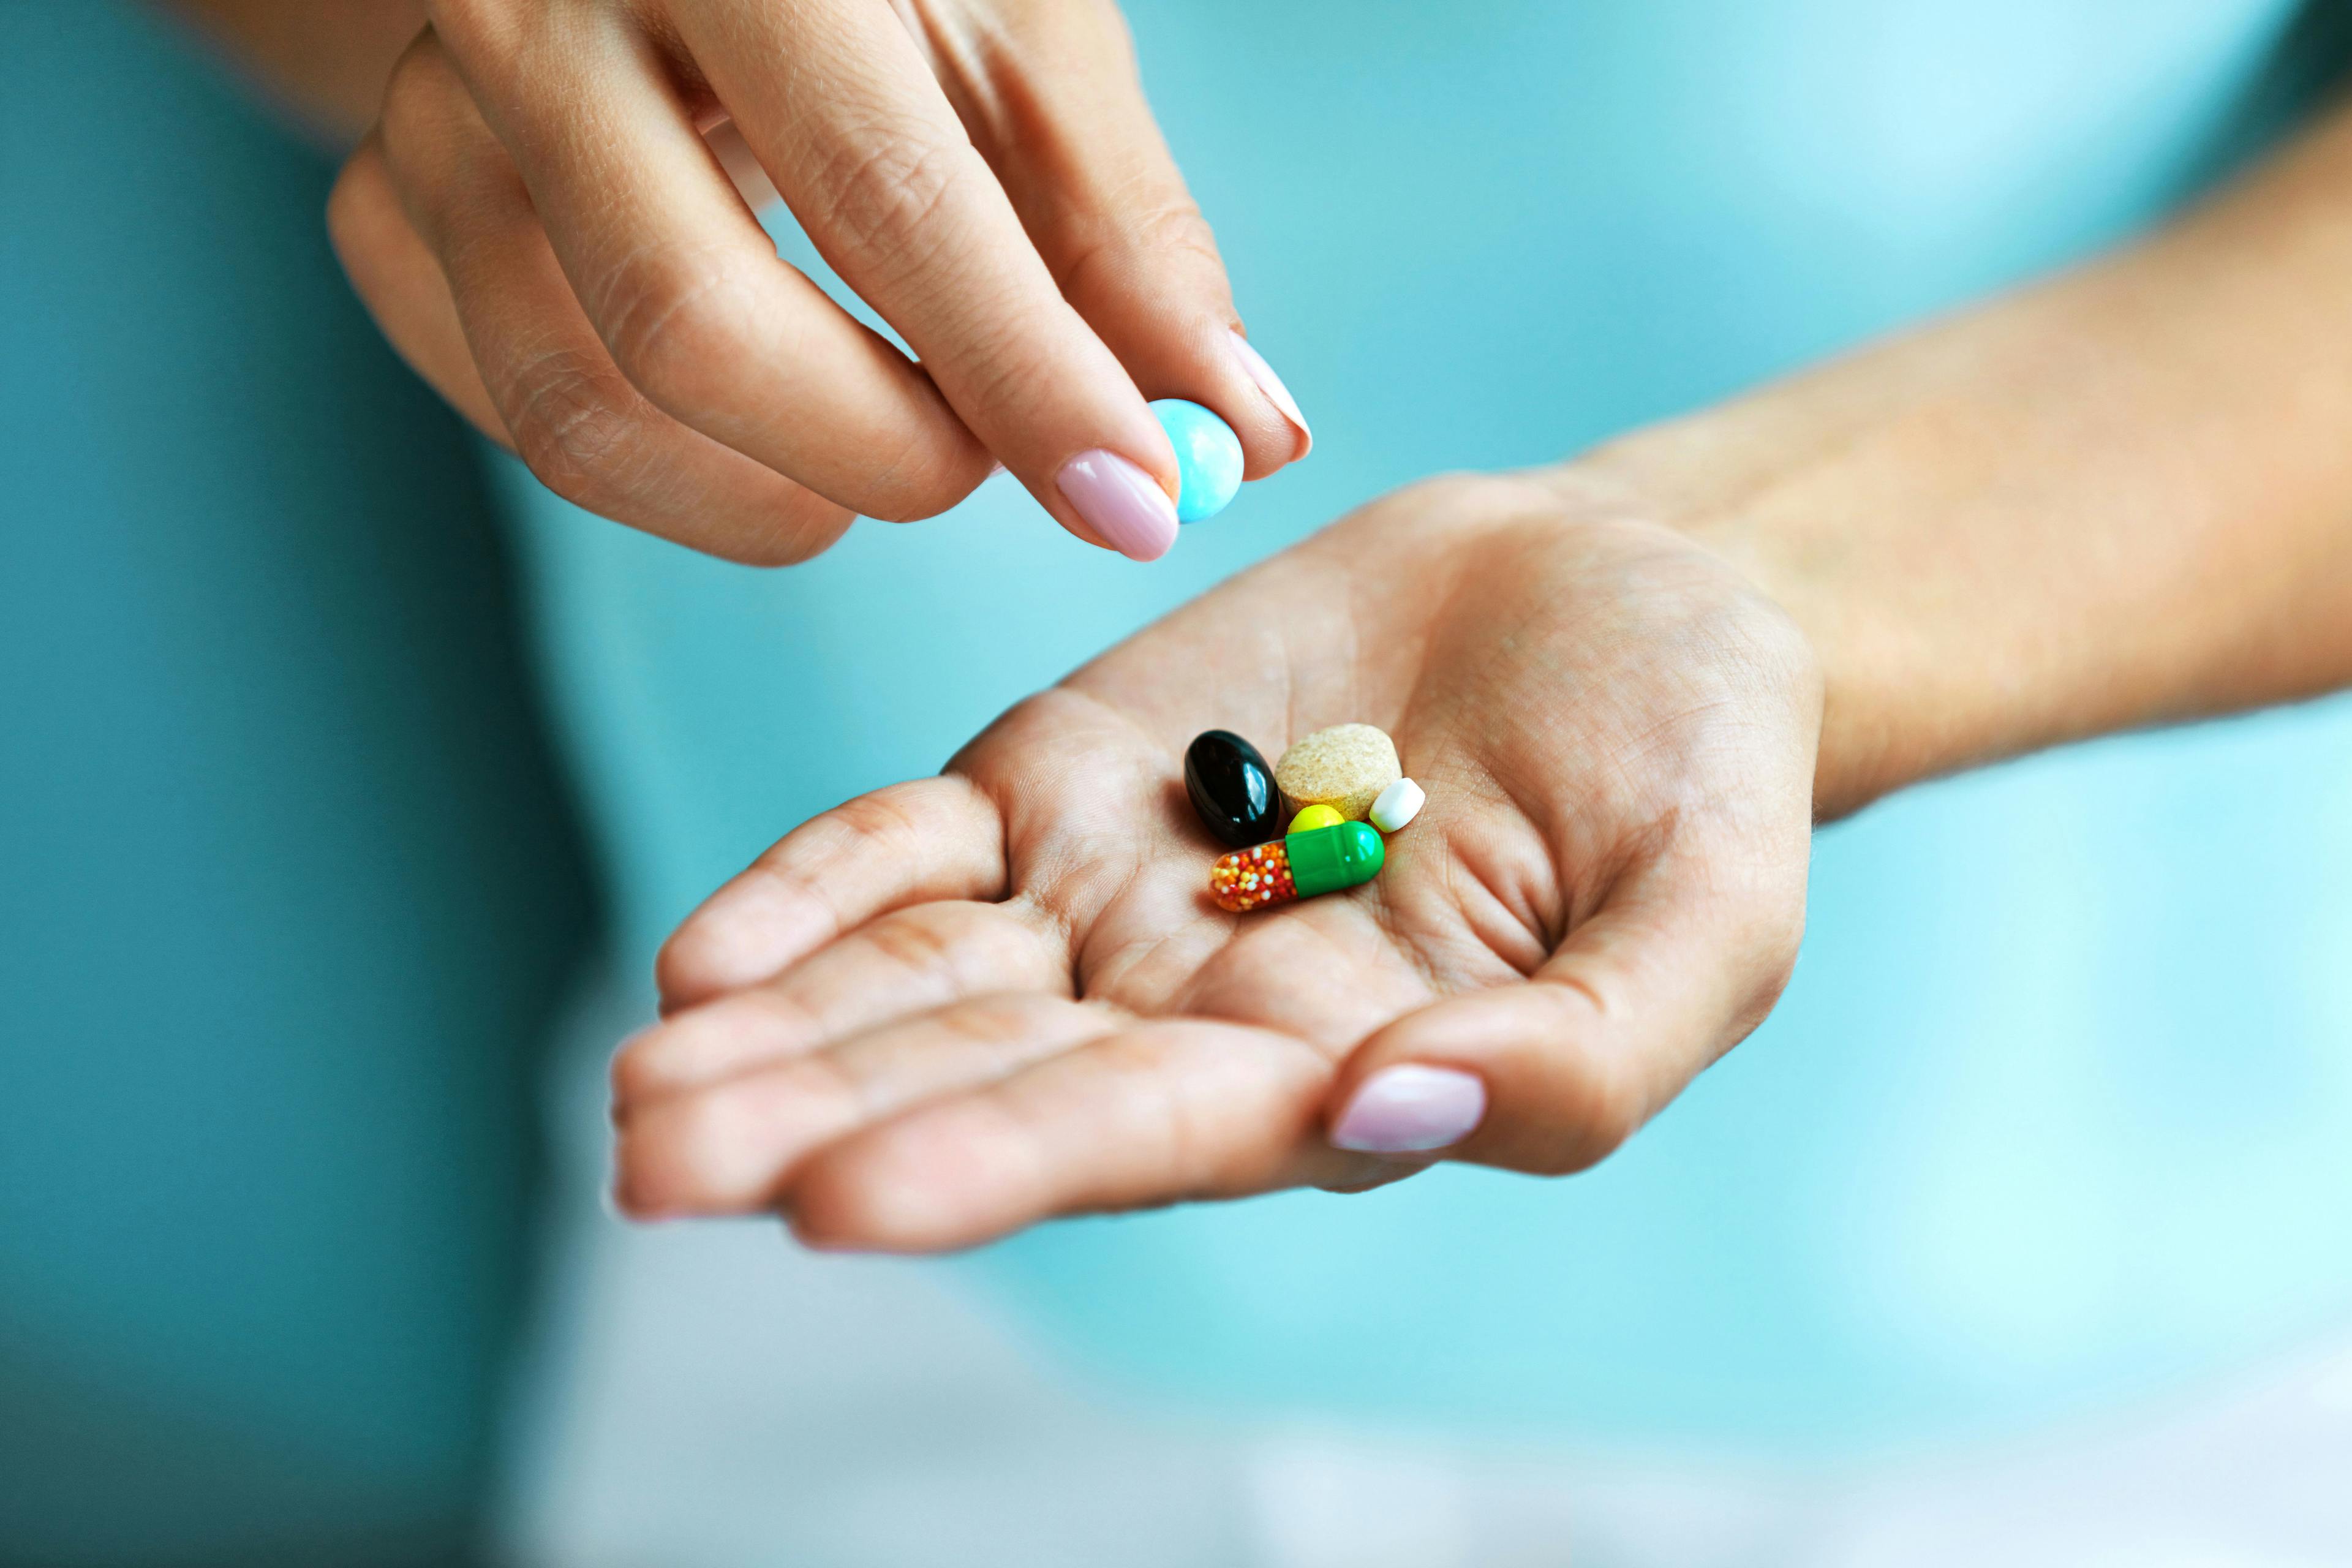 Vitamins And Supplements. Female Hand Holding Colorful Pills | Image Credit: puhhha - stock.adobe.com